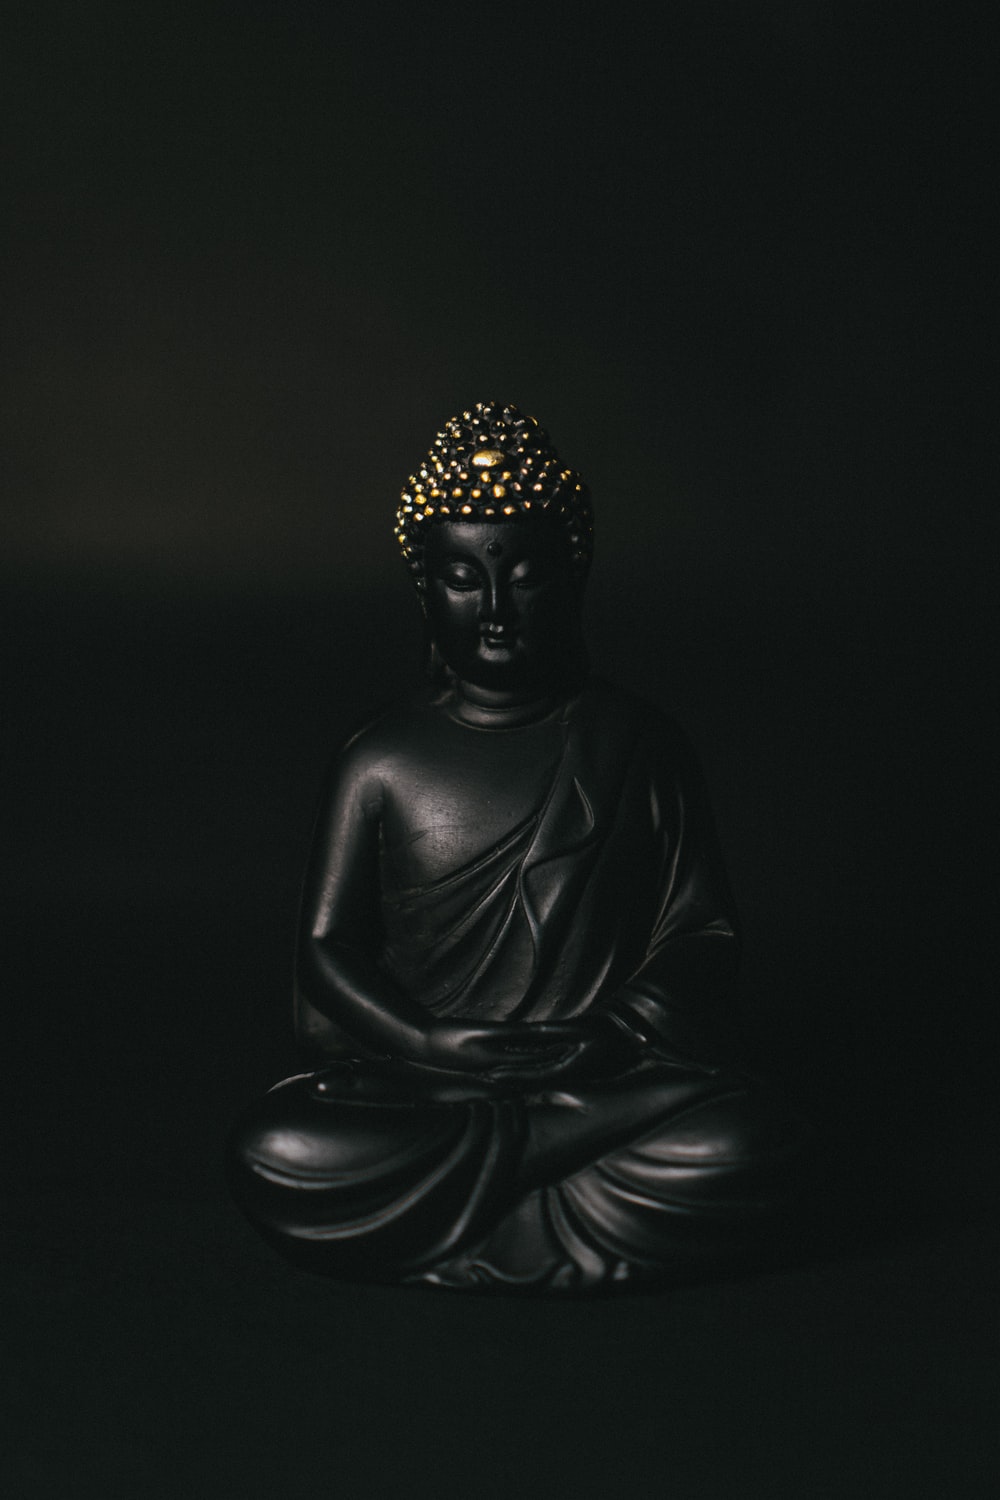 Buddha Art Picture. Download Free Image